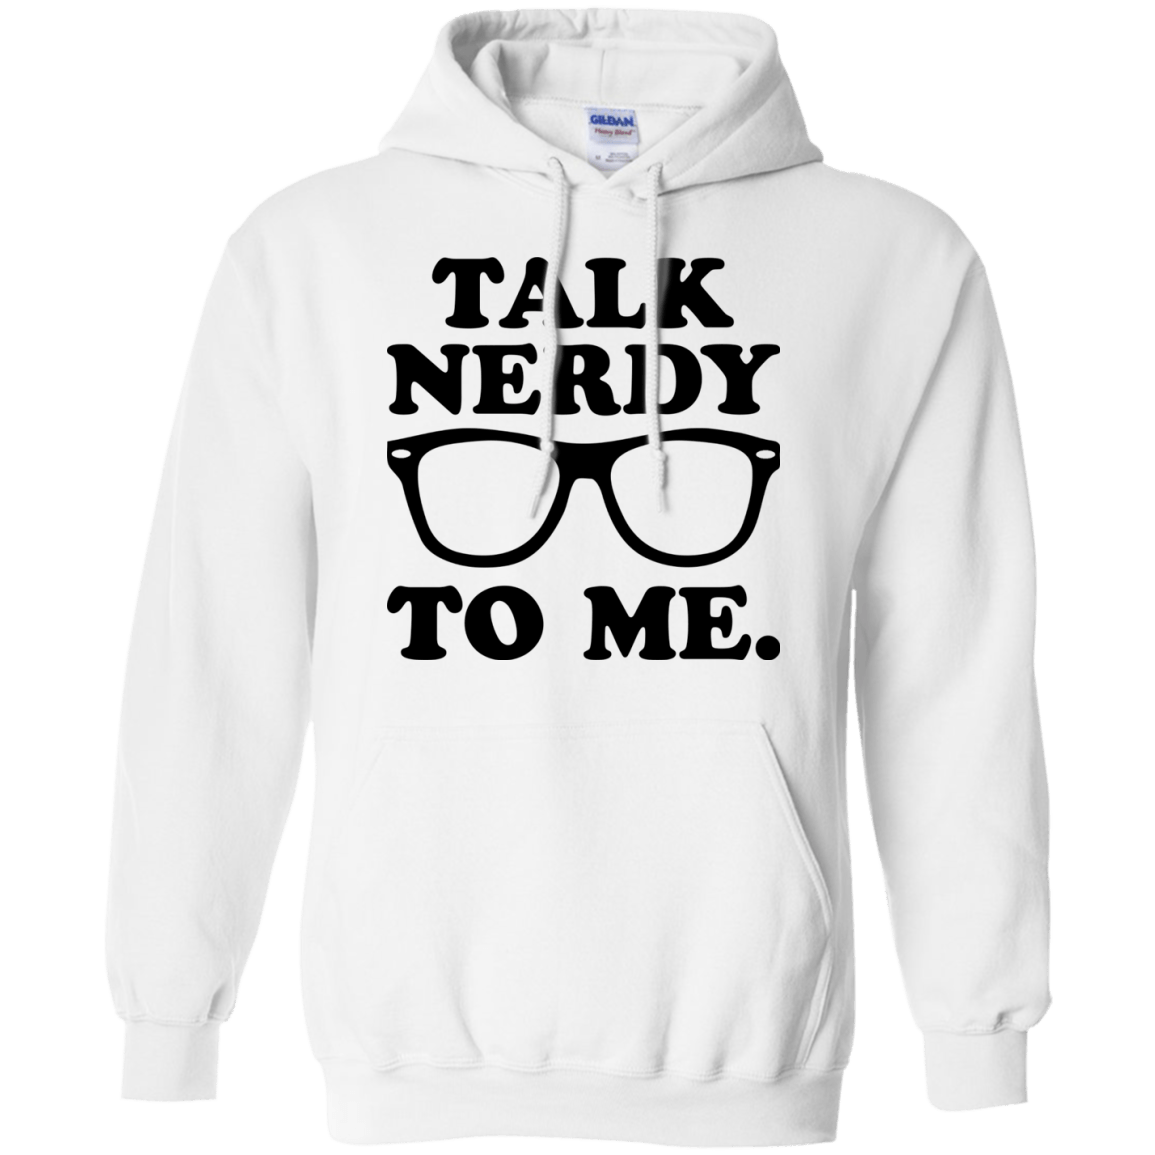 Talk Nerdy To Me - Engineering Outfitters